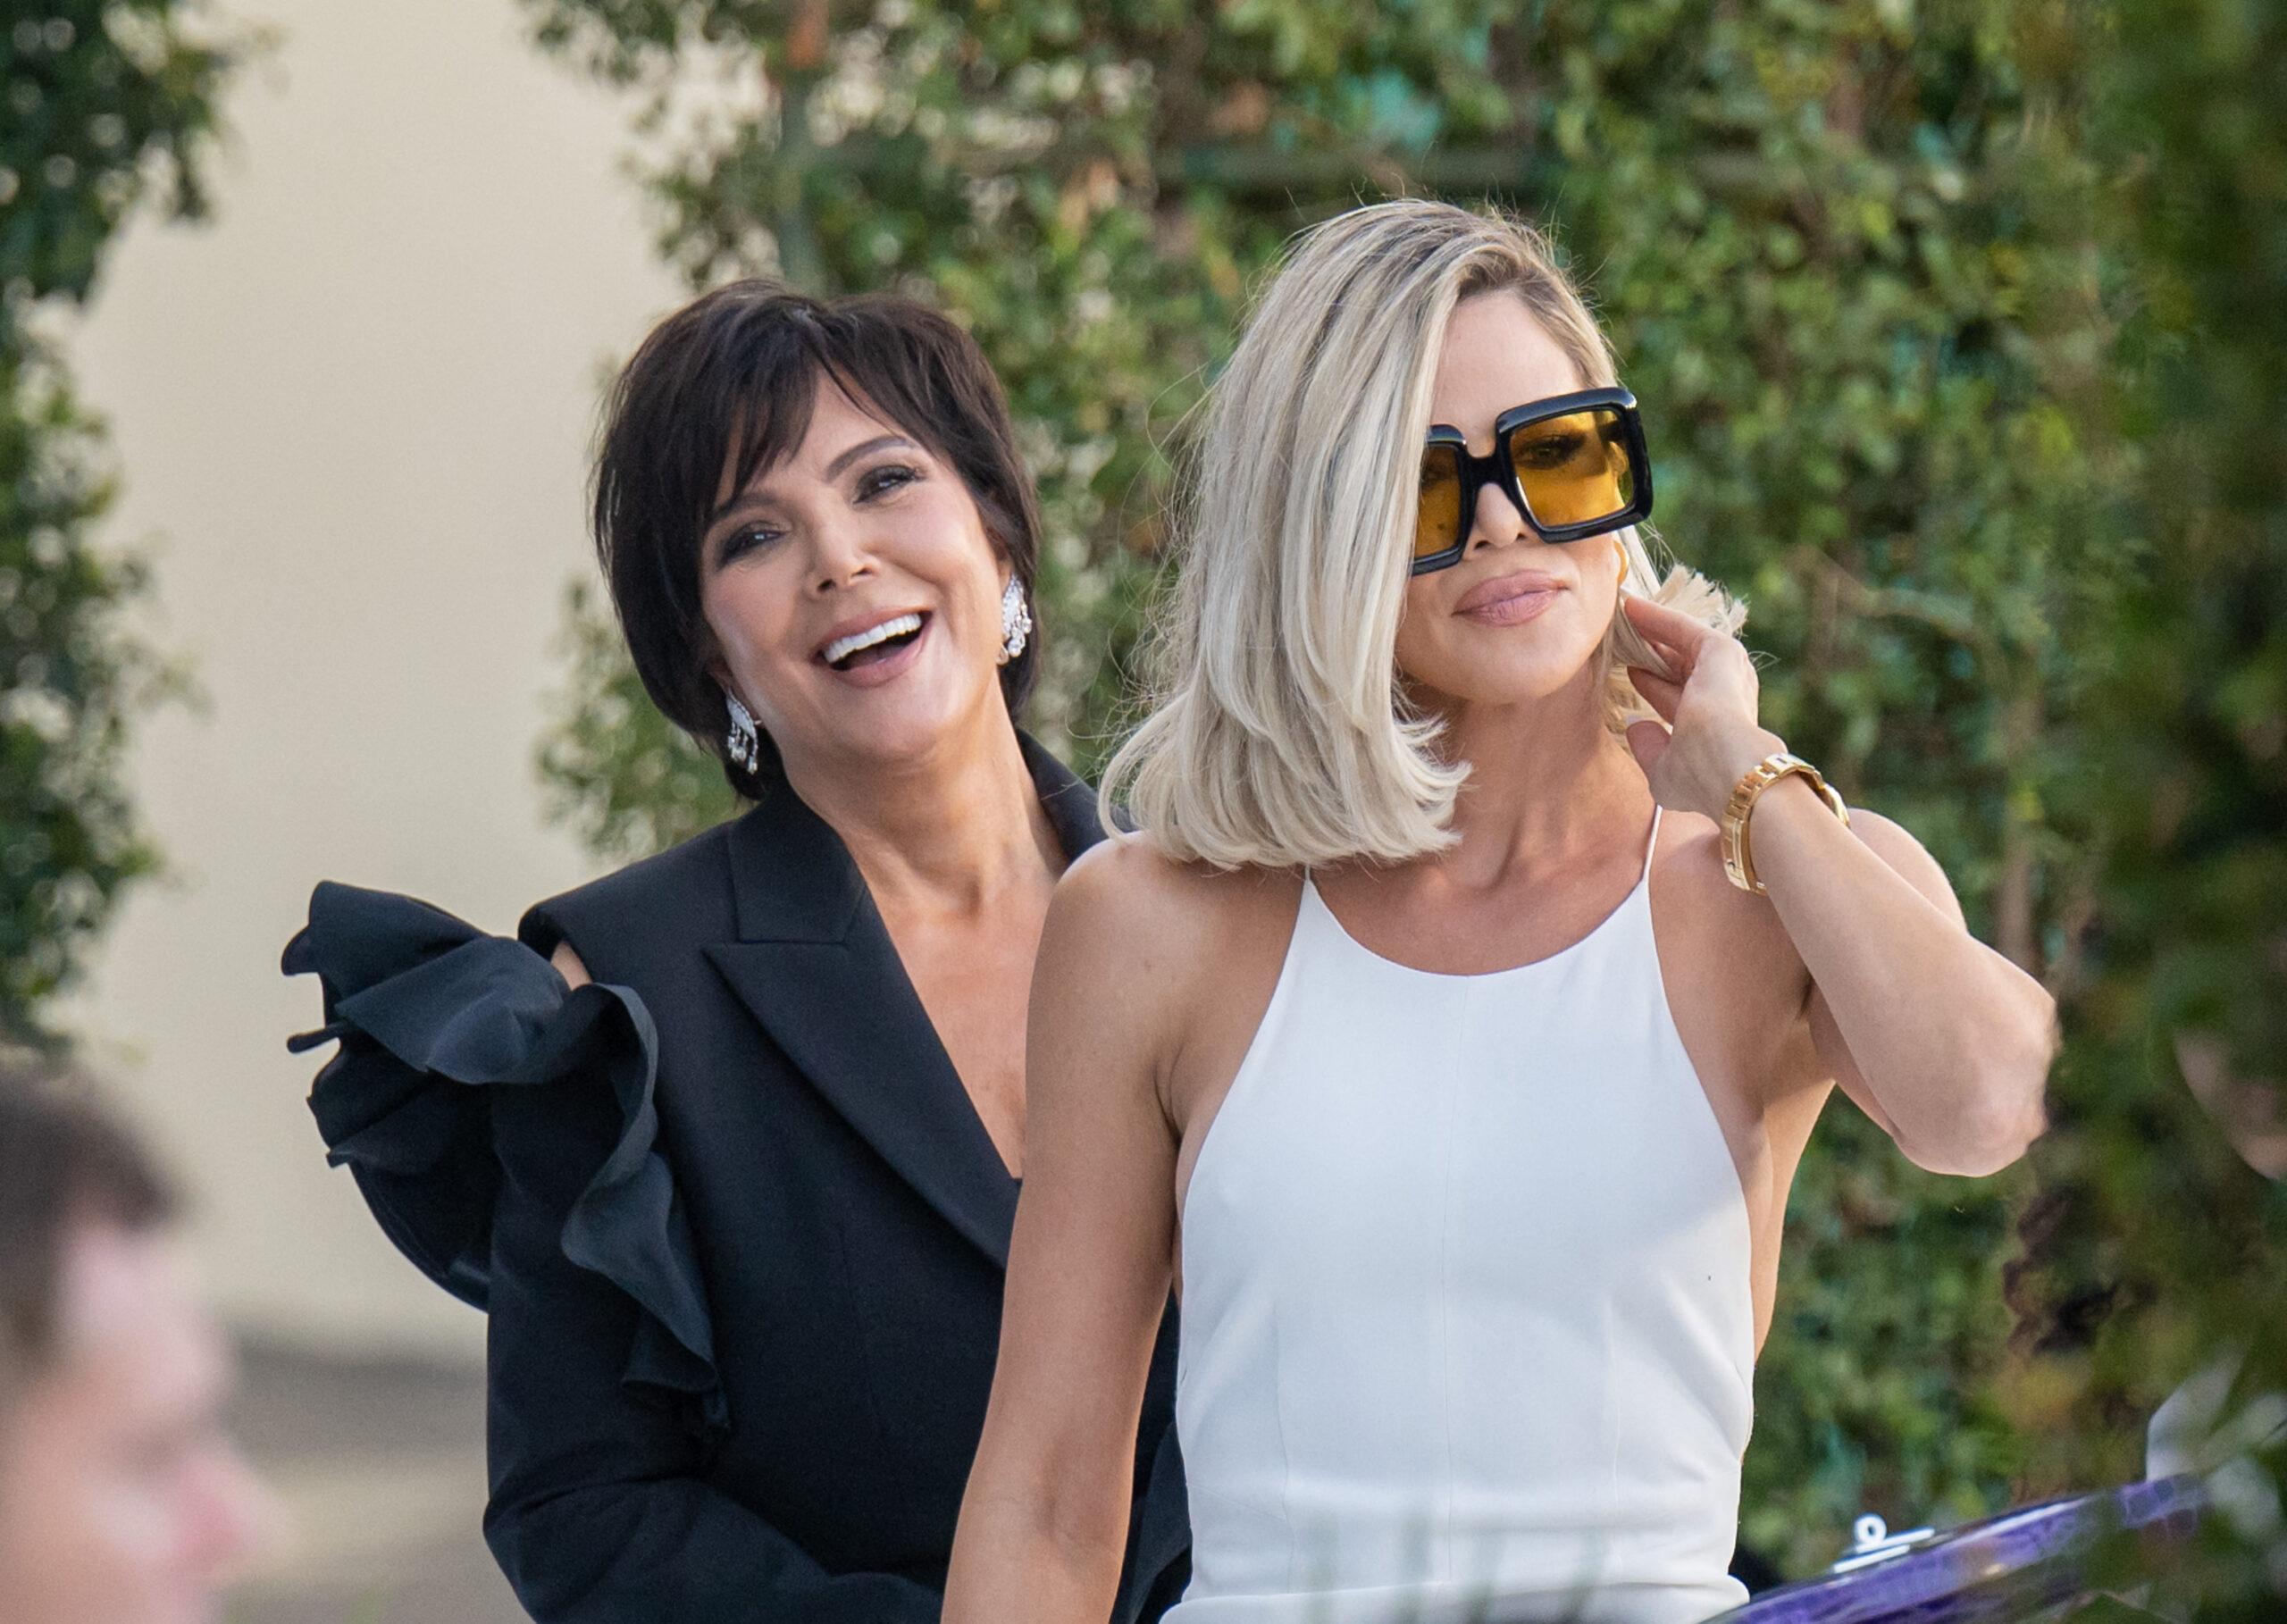 Kris Jenner and Khloe Kardashian are seen in Los Angeles, California.